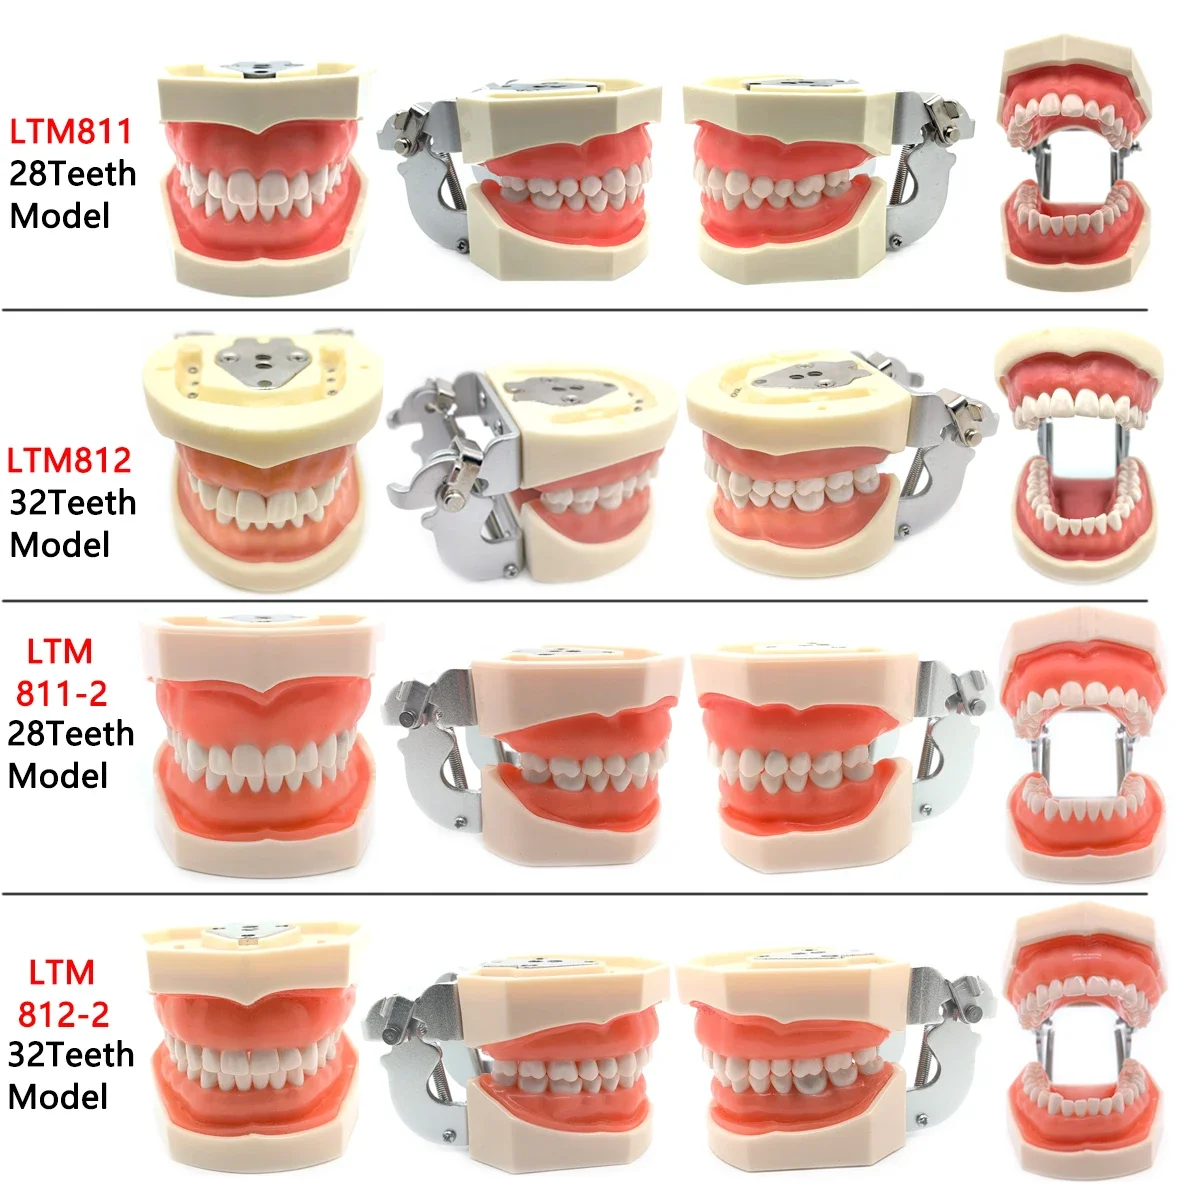 

Dental Teeth Model For Dental Technician Practice Training Studyting Dentistry Typodont Models With Removable Teeth